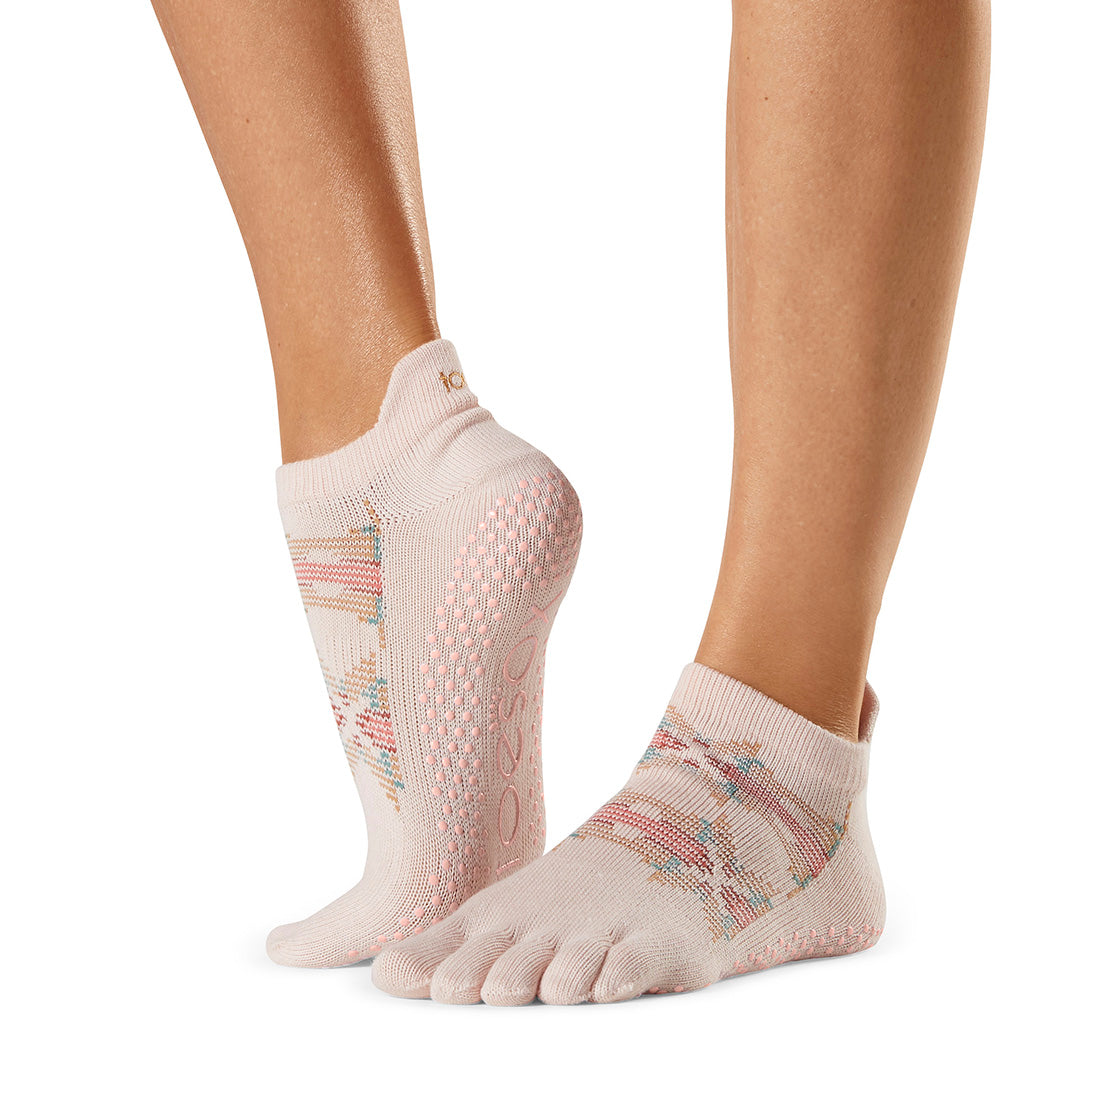 ToeSox Grip Socks in Hong Kong  T8 Fitness - T8 Fitness - Asia Yoga,  Pilates, Rehab, Fitness Products